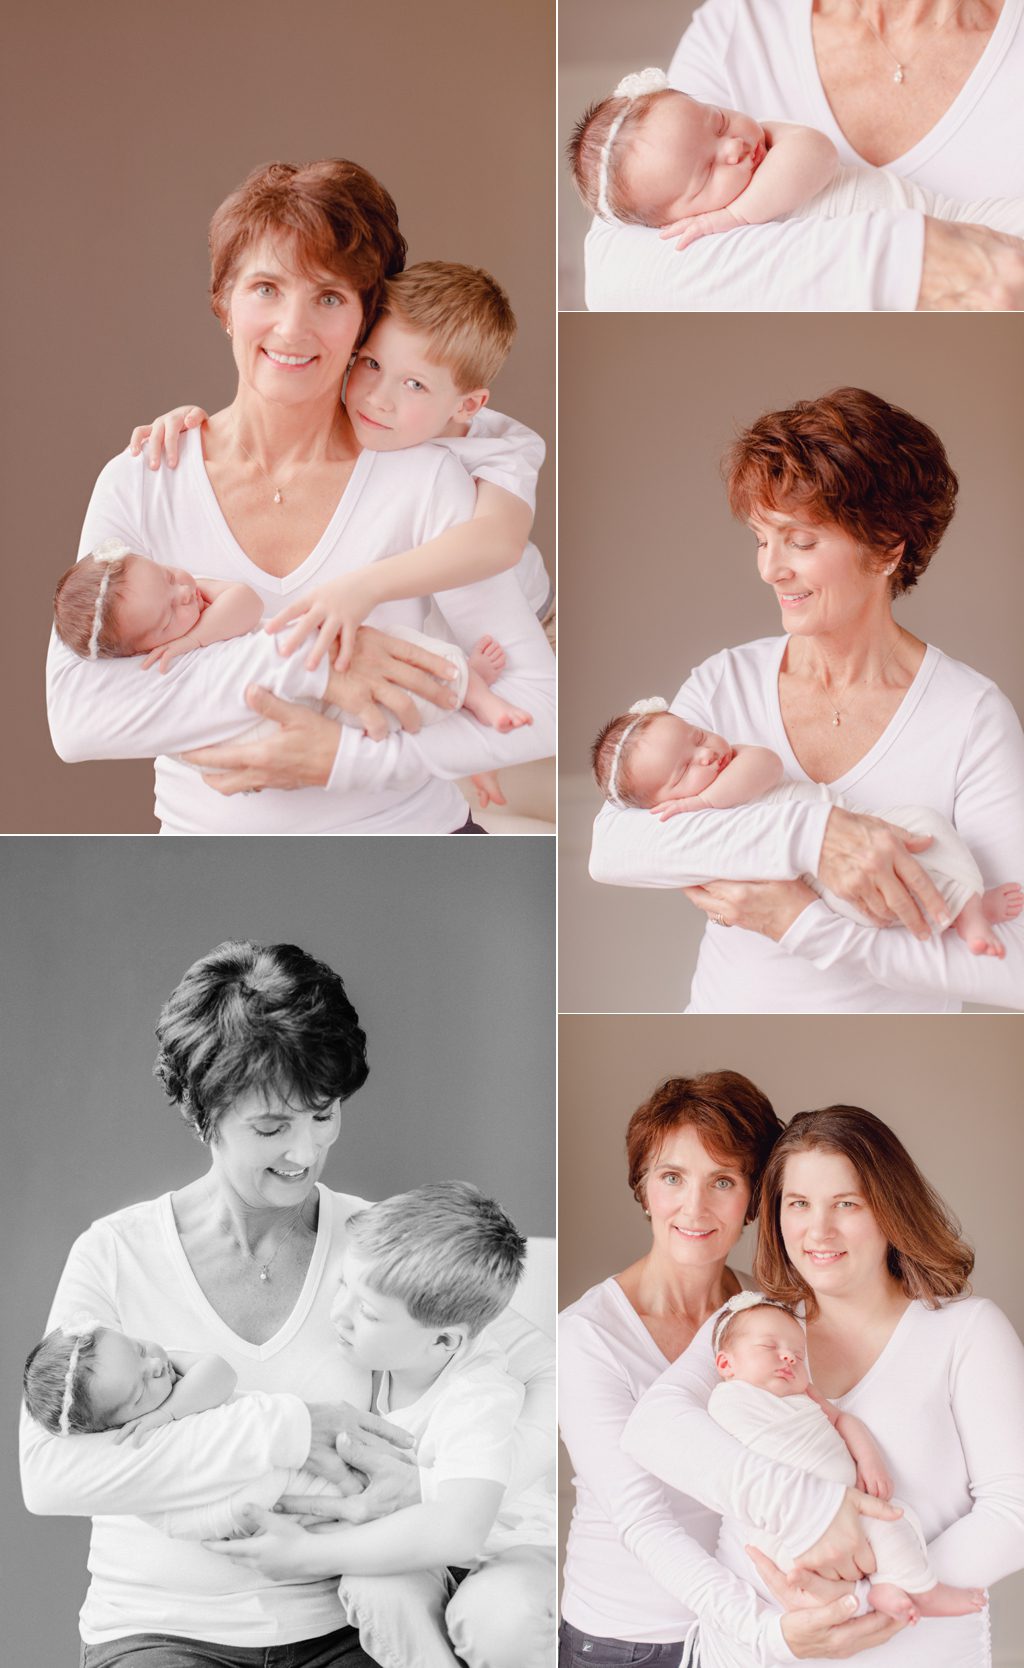 Portraits of grandmother with newborn granddaughter and her three year old grandson.